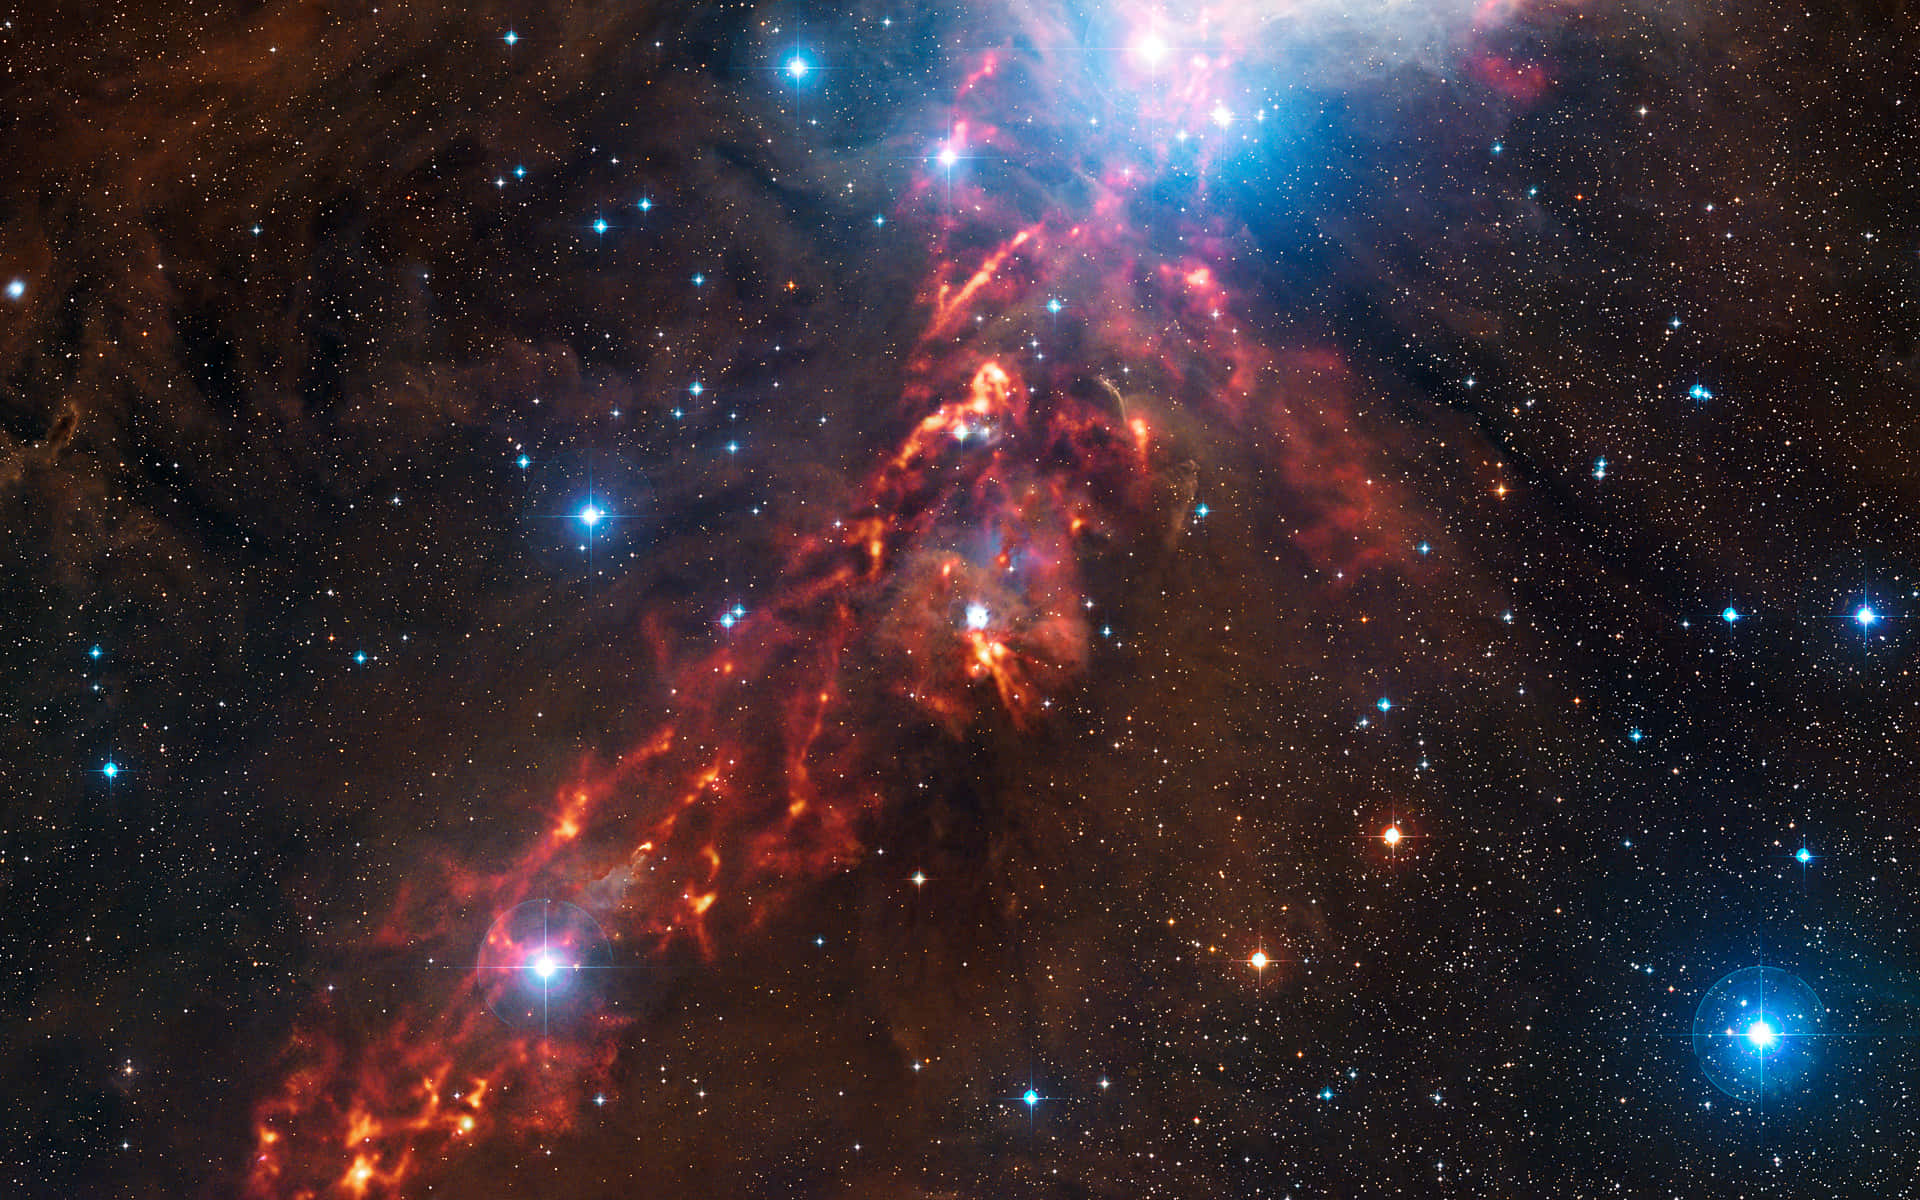 The majestic Orion constellation in a star-filled night sky